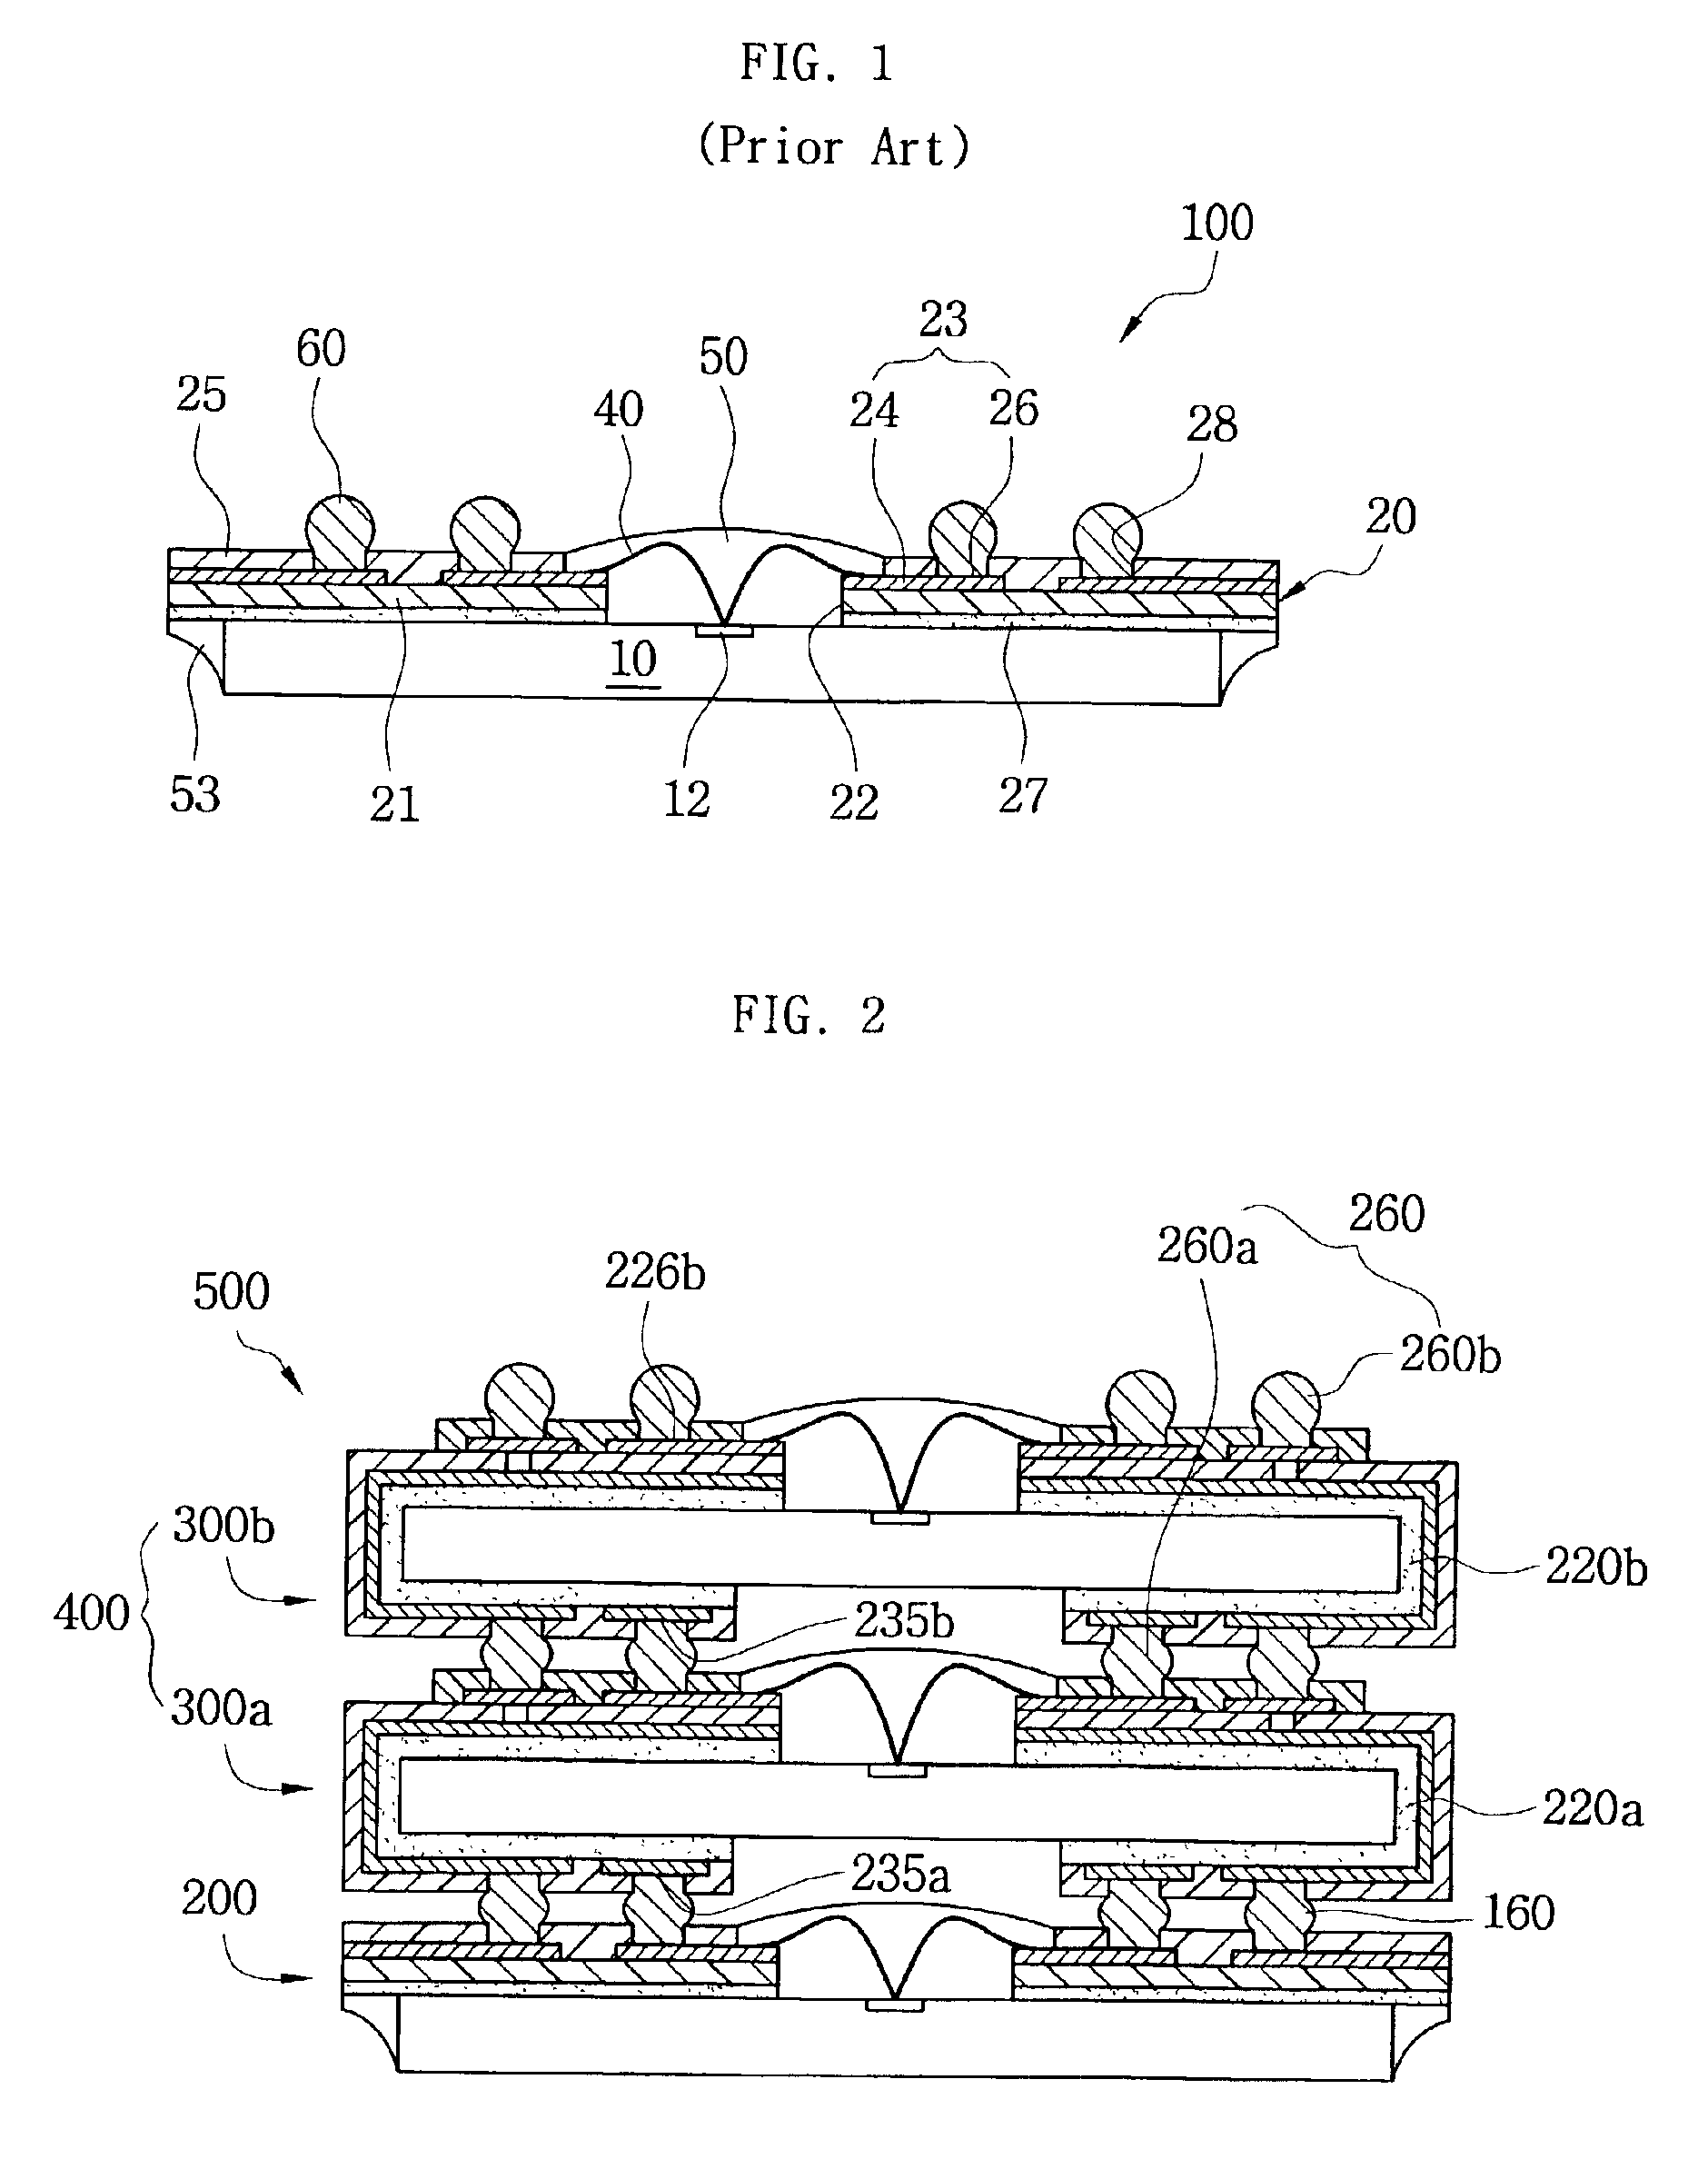 Stack package using flexible double wiring substrate